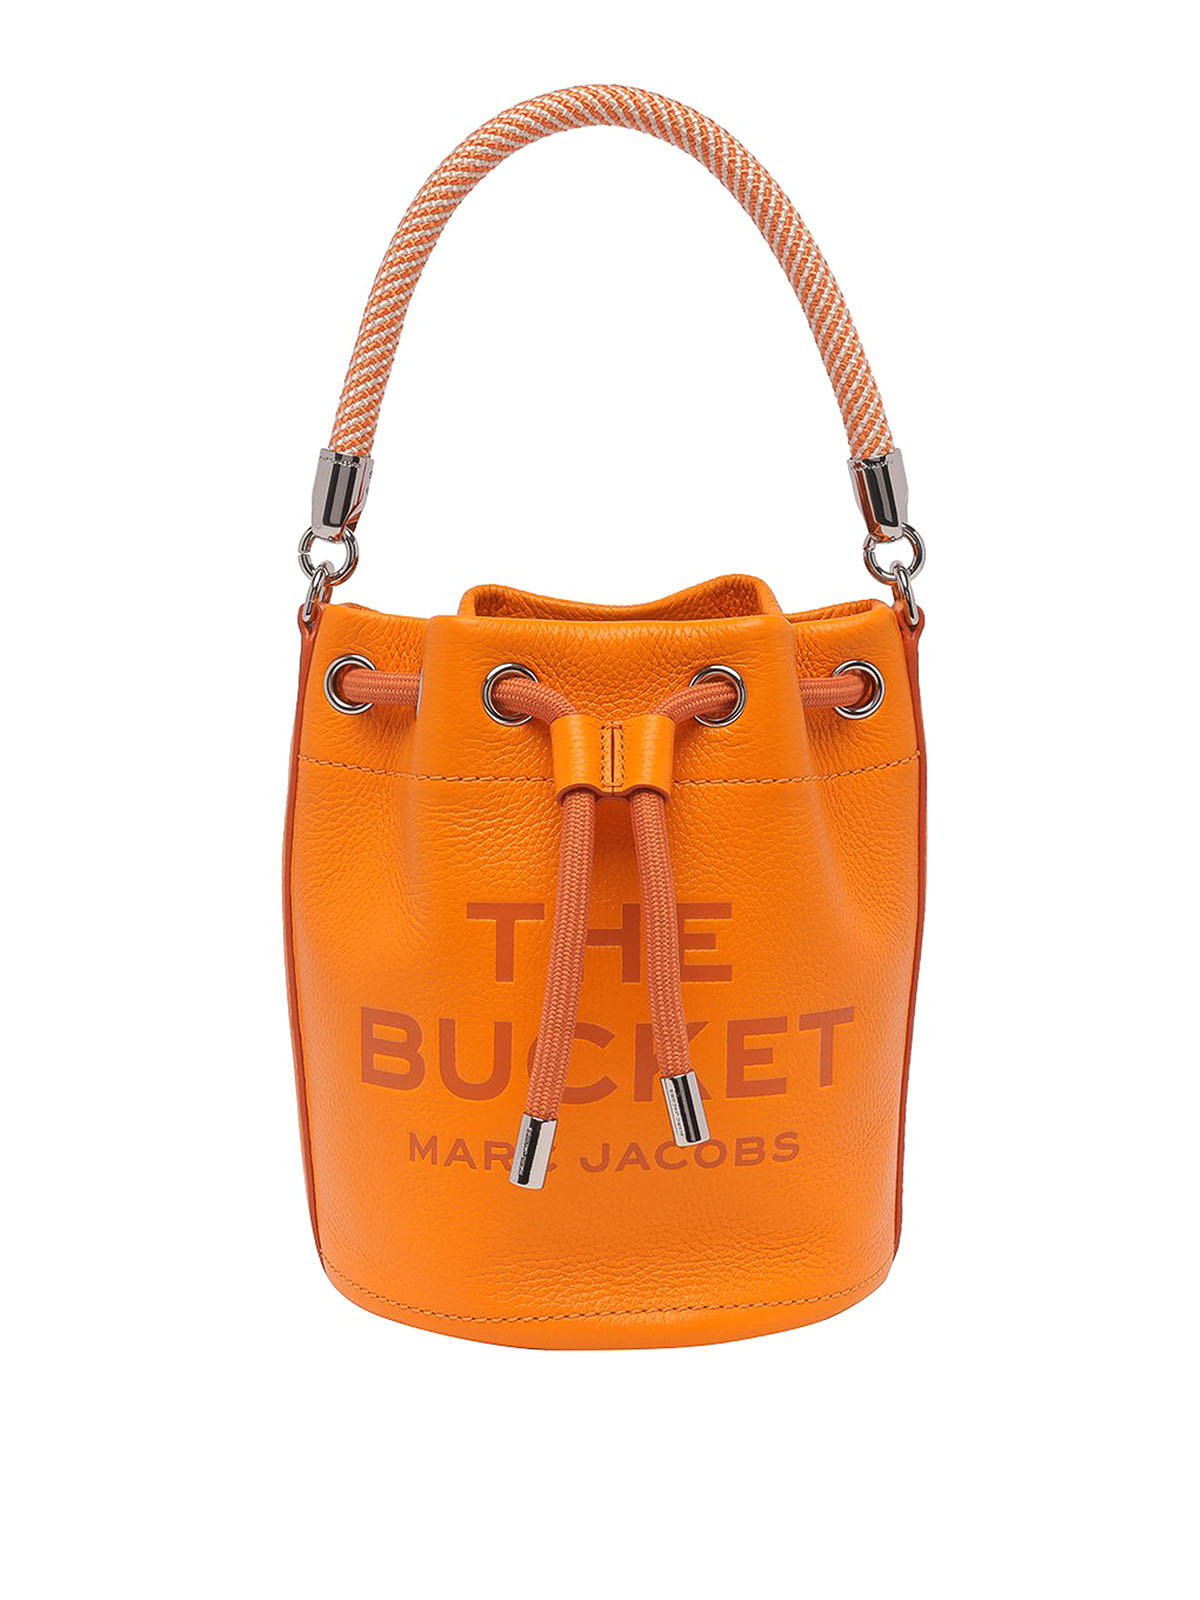 The Leather Bucket Bag, Marc Jacobs